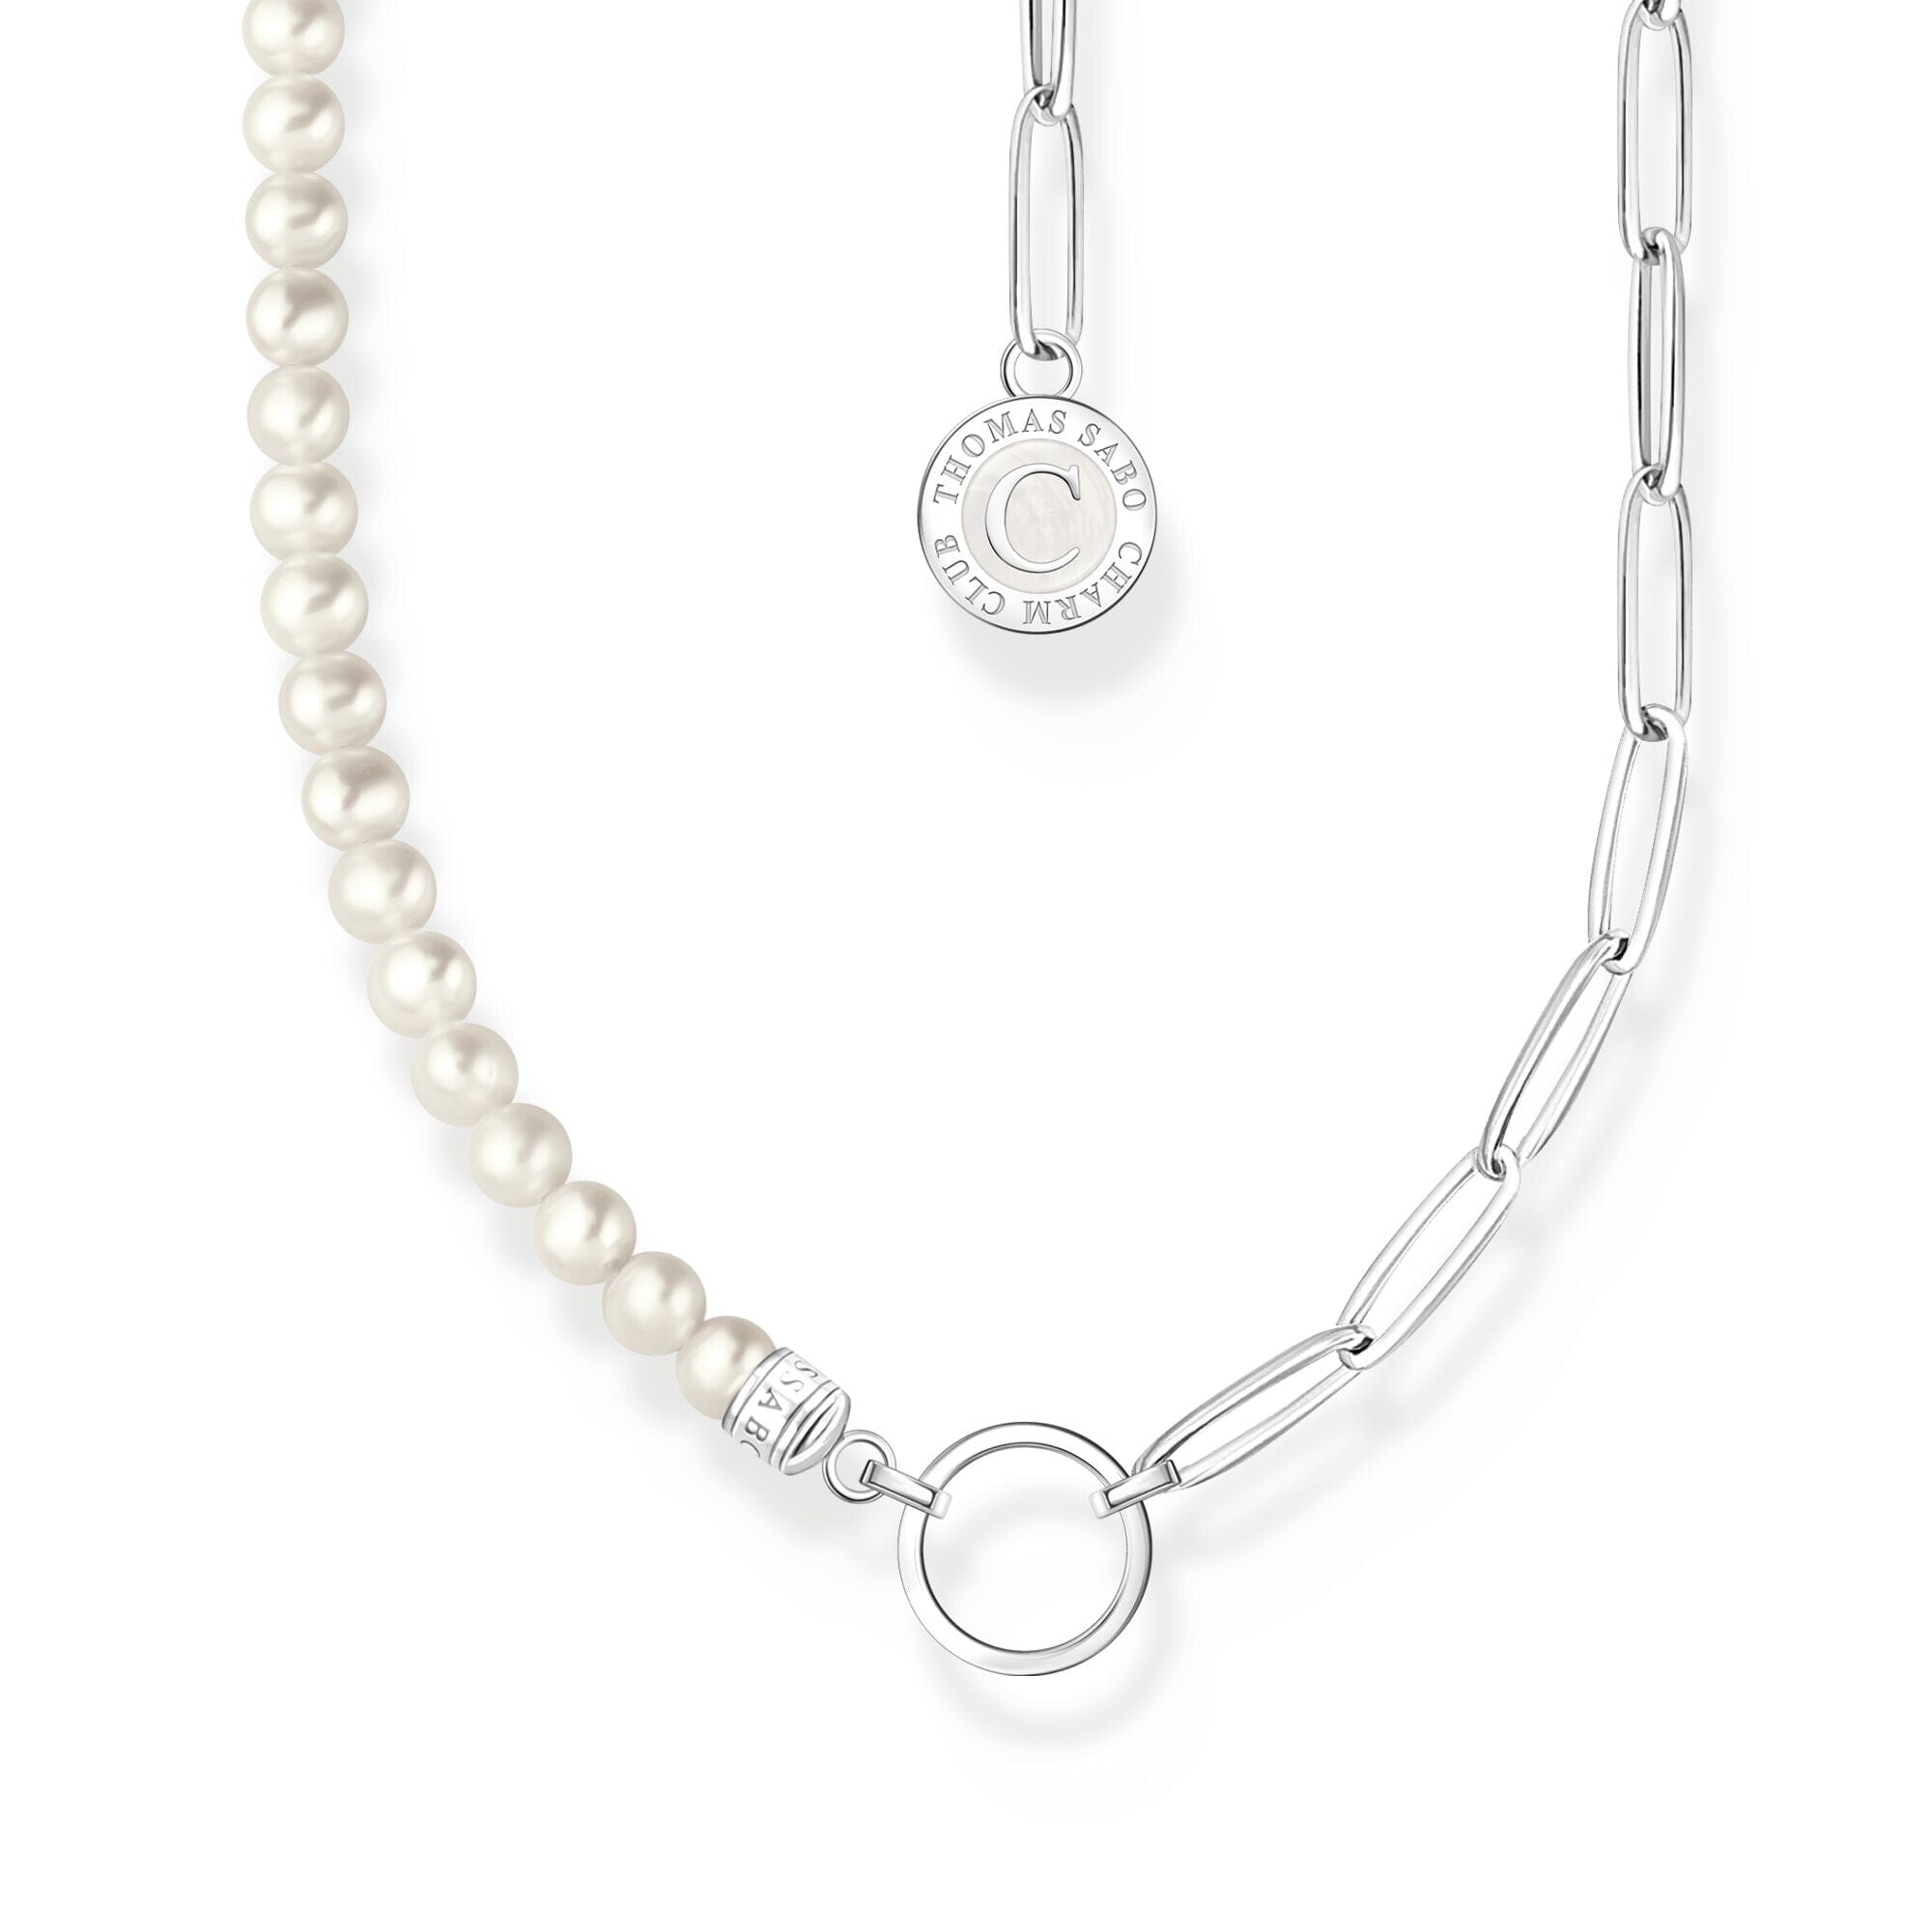 THOMAS SABO Charm Necklaces with Pearls and Chain Links Silver Necklaces THOMAS SABO Charmista 